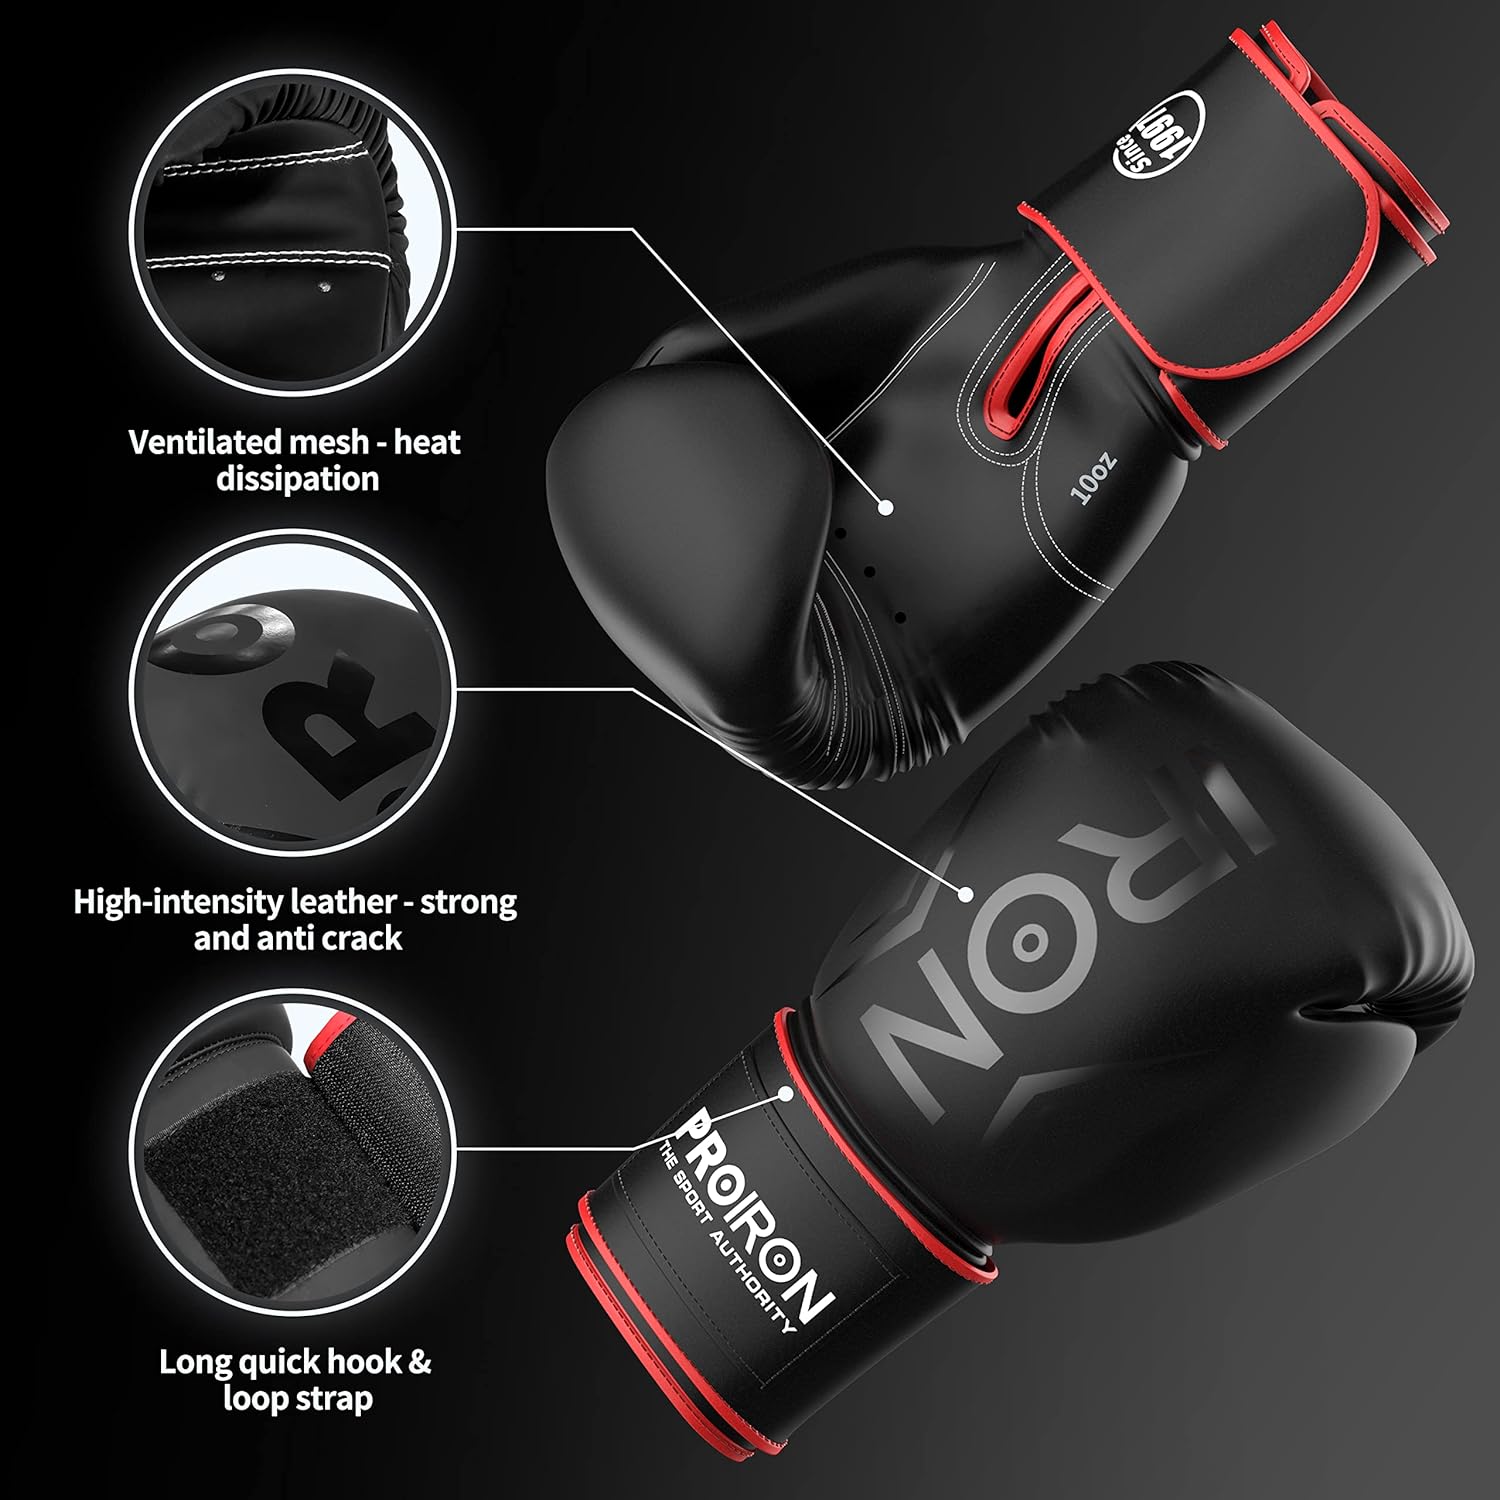 PROIRON Boxing Gloves MMA Punch Bag Training Mitts for Muay Thai, Sparring, Kickboxing, Fighting, Martial Arts, Workout Gloves 8oz, 10oz, 12oz, 14oz with Free